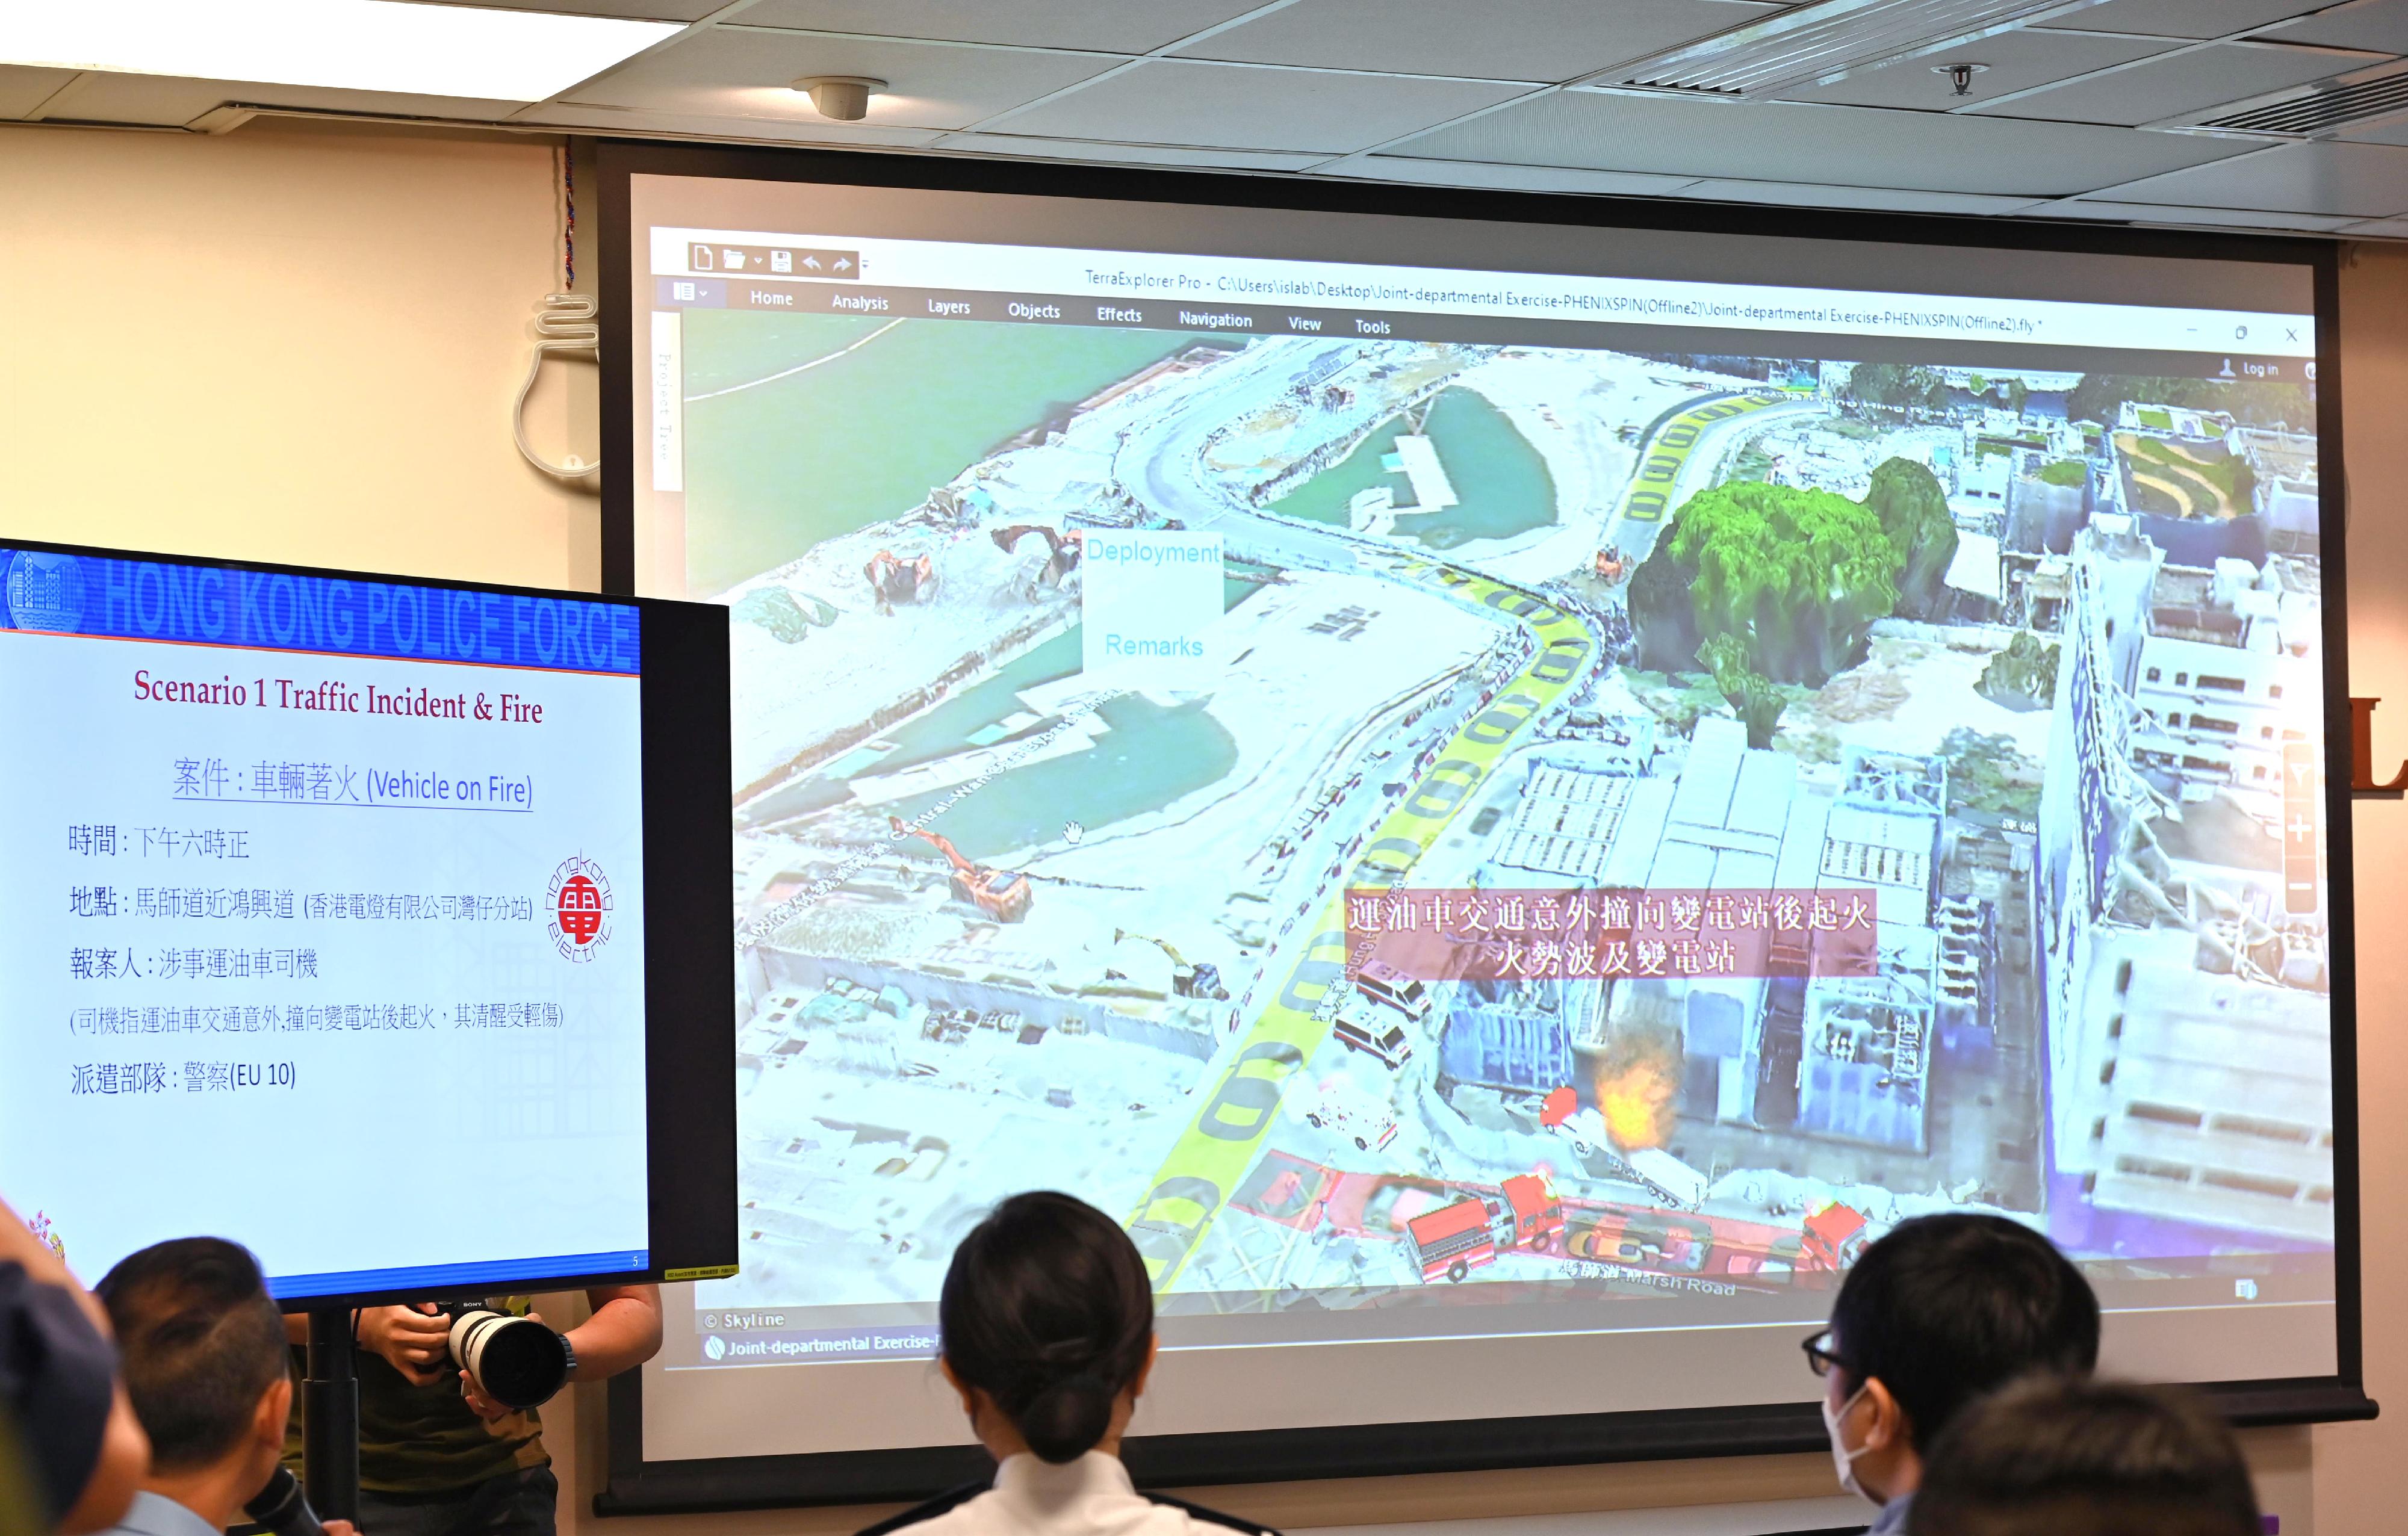 Police Hong Kong Island Regional Headquarters, together with the Hospital Authority, the Fire Services Department, the Transport Department, the Electrical and Mechanical Services Department, the Lands Department and the Hongkong Electric Company, Limited, conducted an inter-departmental major incident exercise codenamed "PHOENIXSPIN" this morning (November 5). Picture shows Police utilising the Geospatial Analytics, Information and Applications (GAIA) system for the first time, which was developed by the Innovation and Solution Lab, Information Systems Wing of Police.